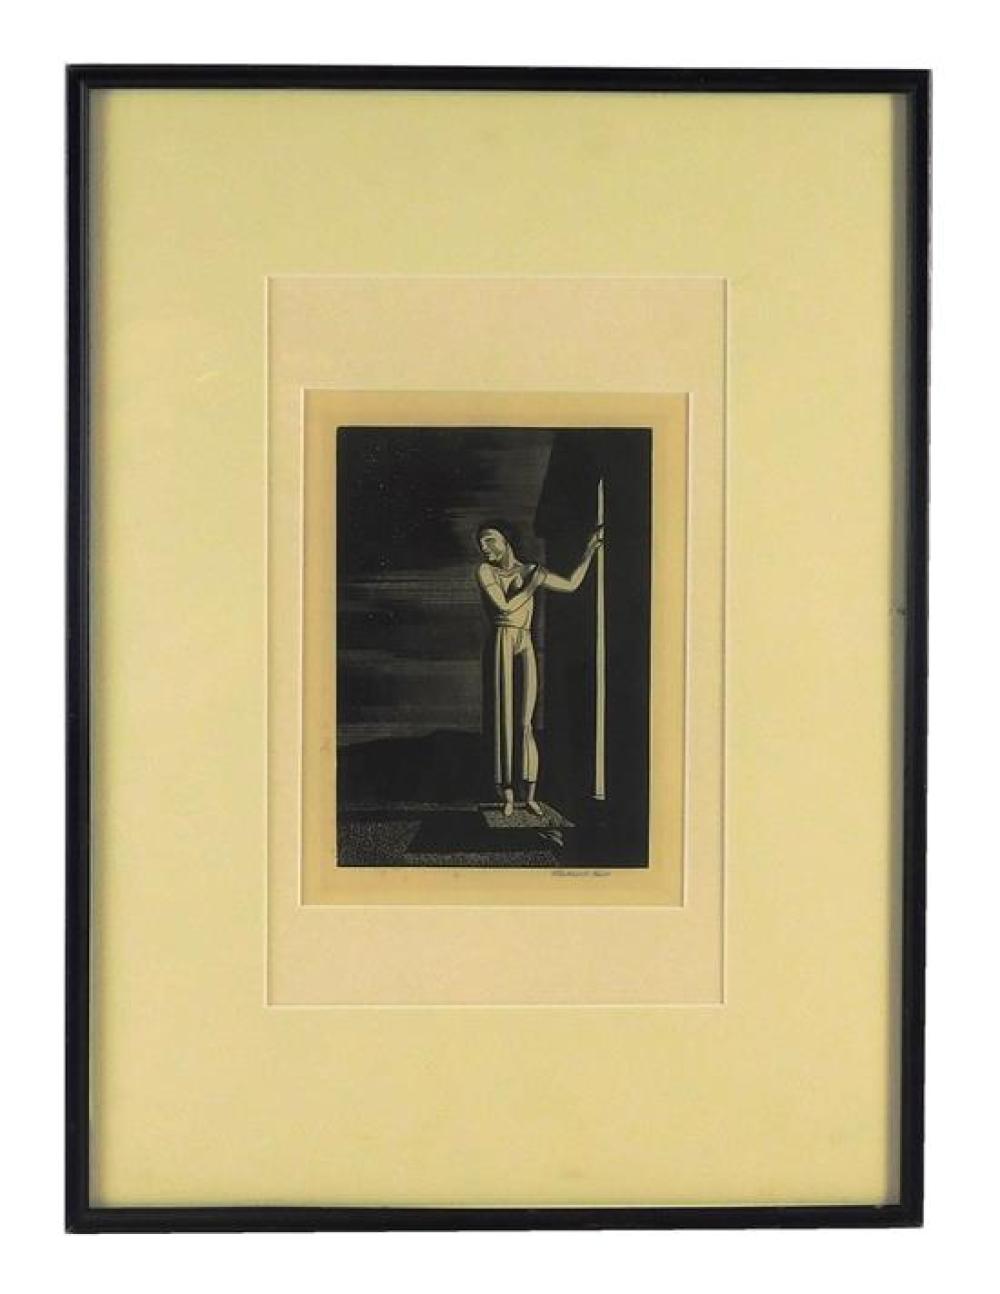 ROCKWELL KENT AMERICAN 1882 1971  31ce0a